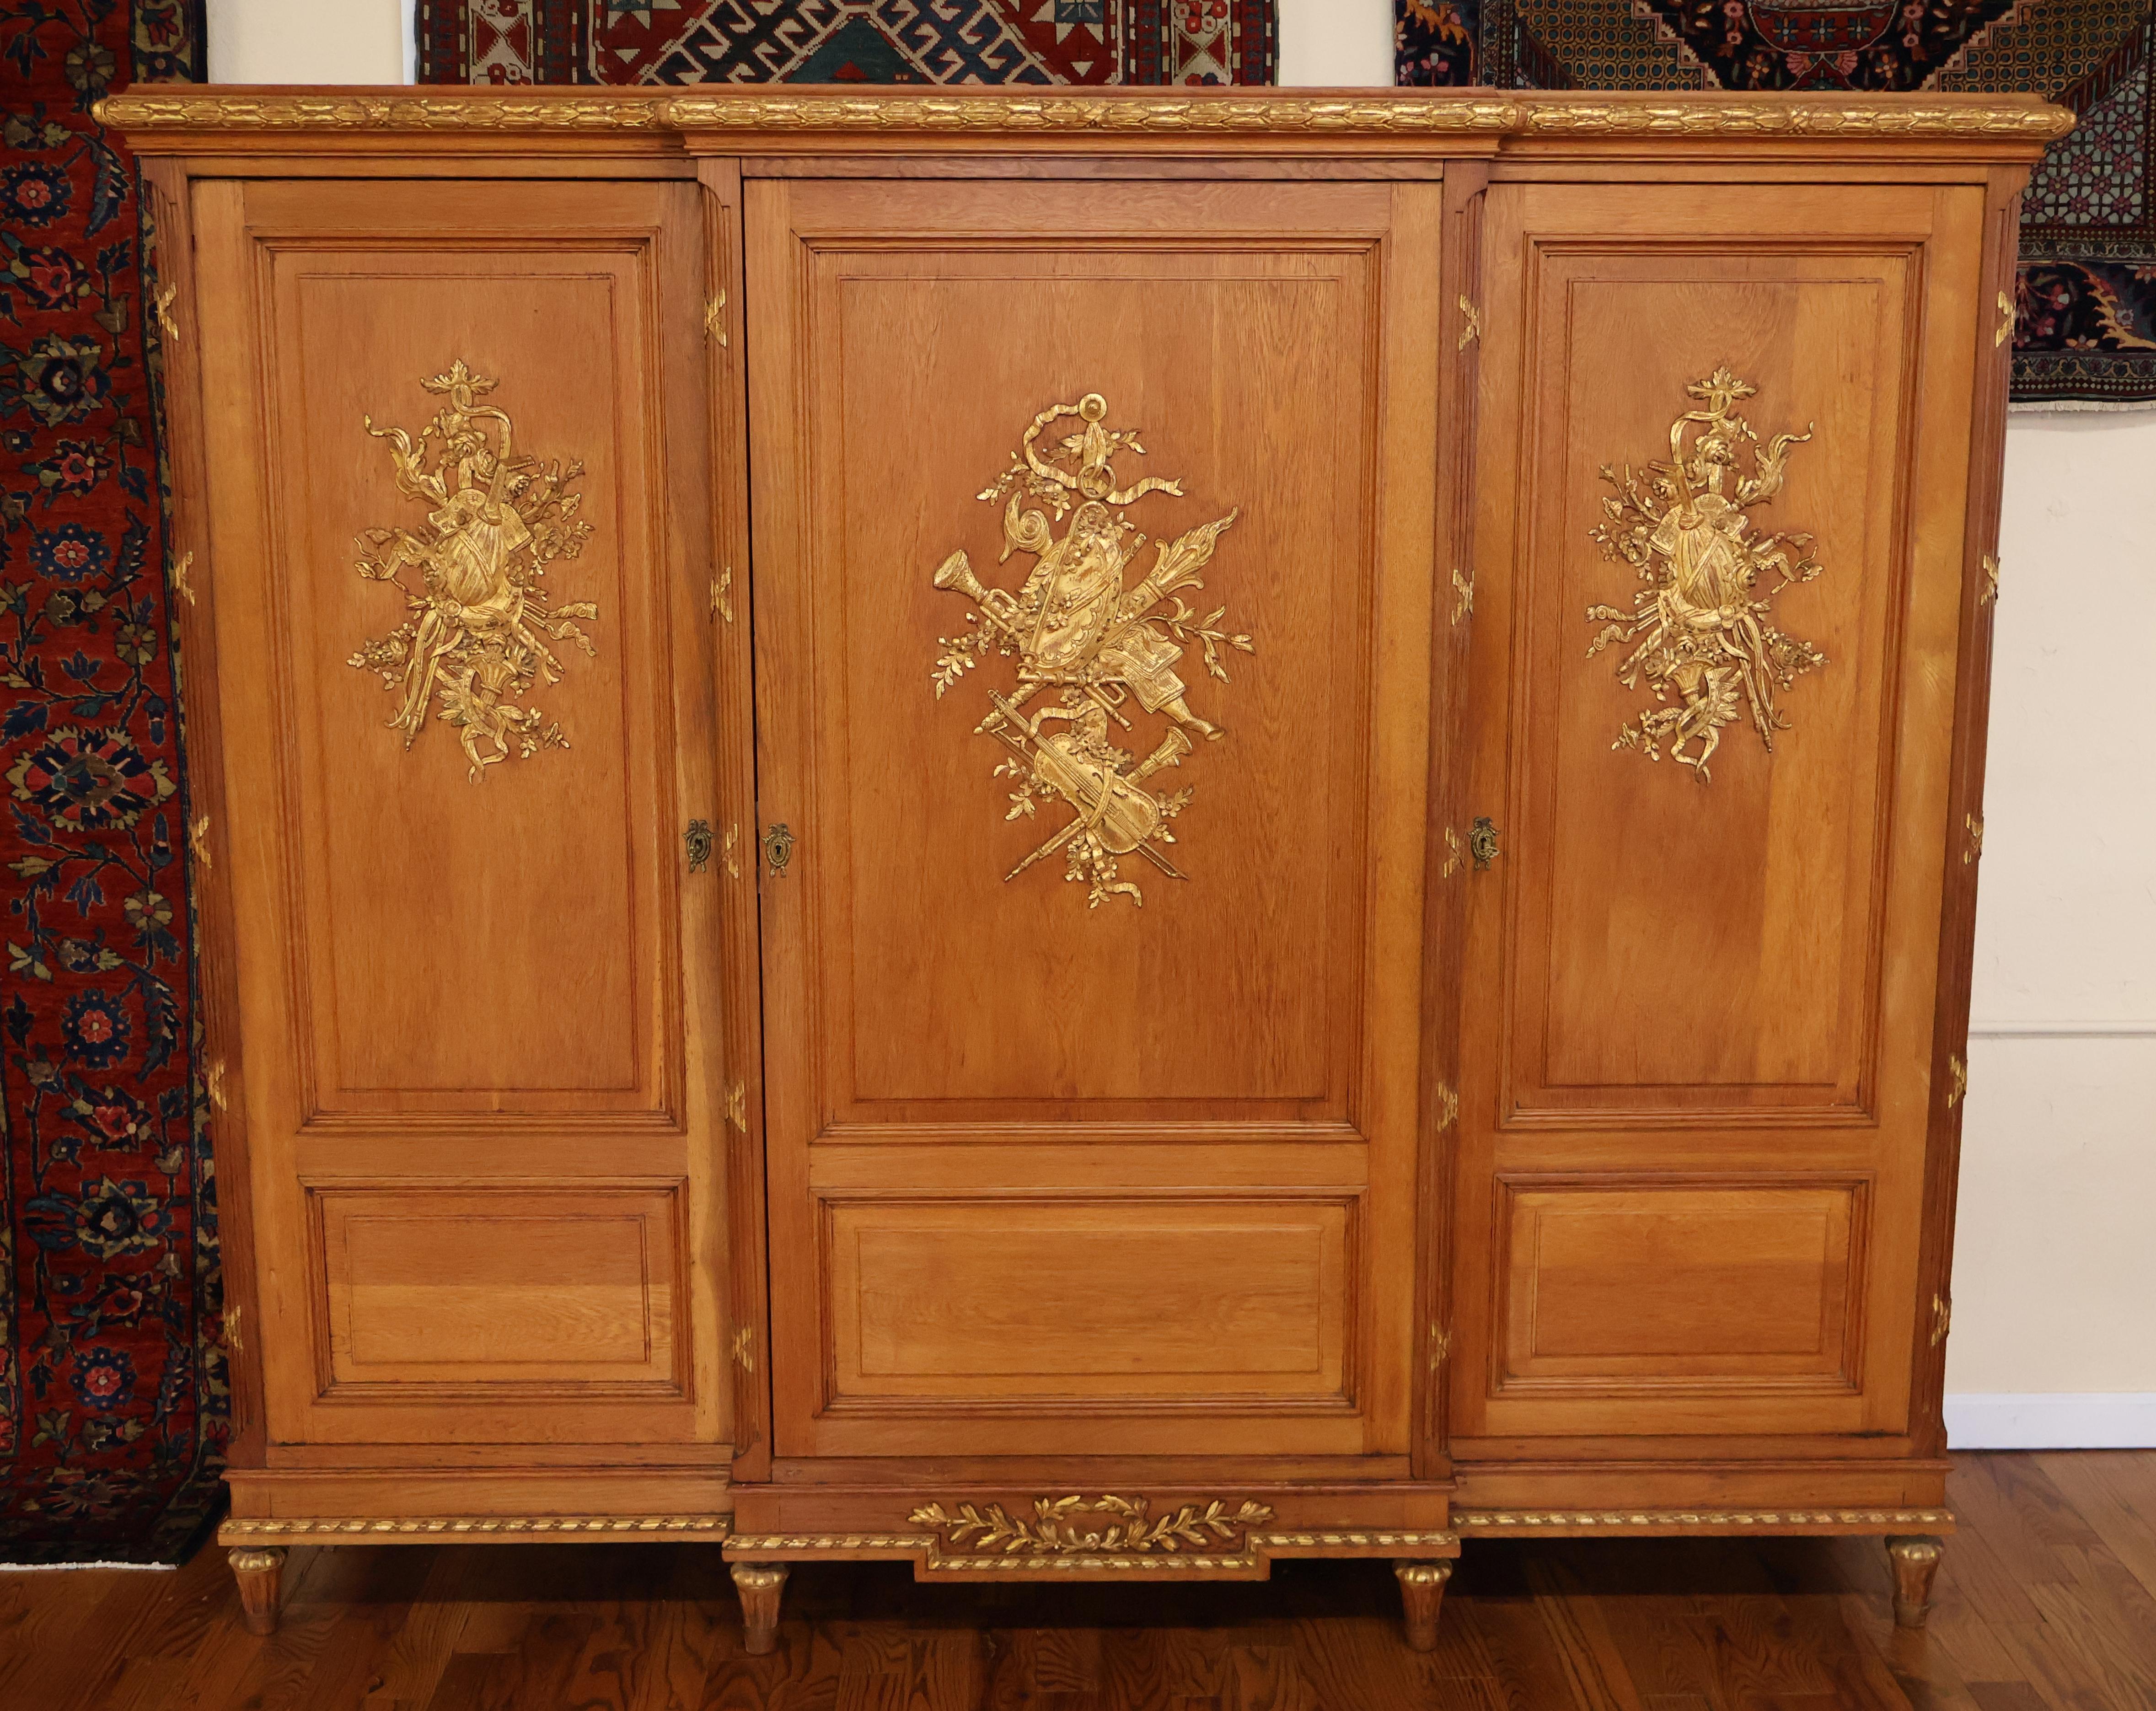 ​Early 20th Century Country French Louis XVI Style Oak Armoire

Dimensions : 89.5